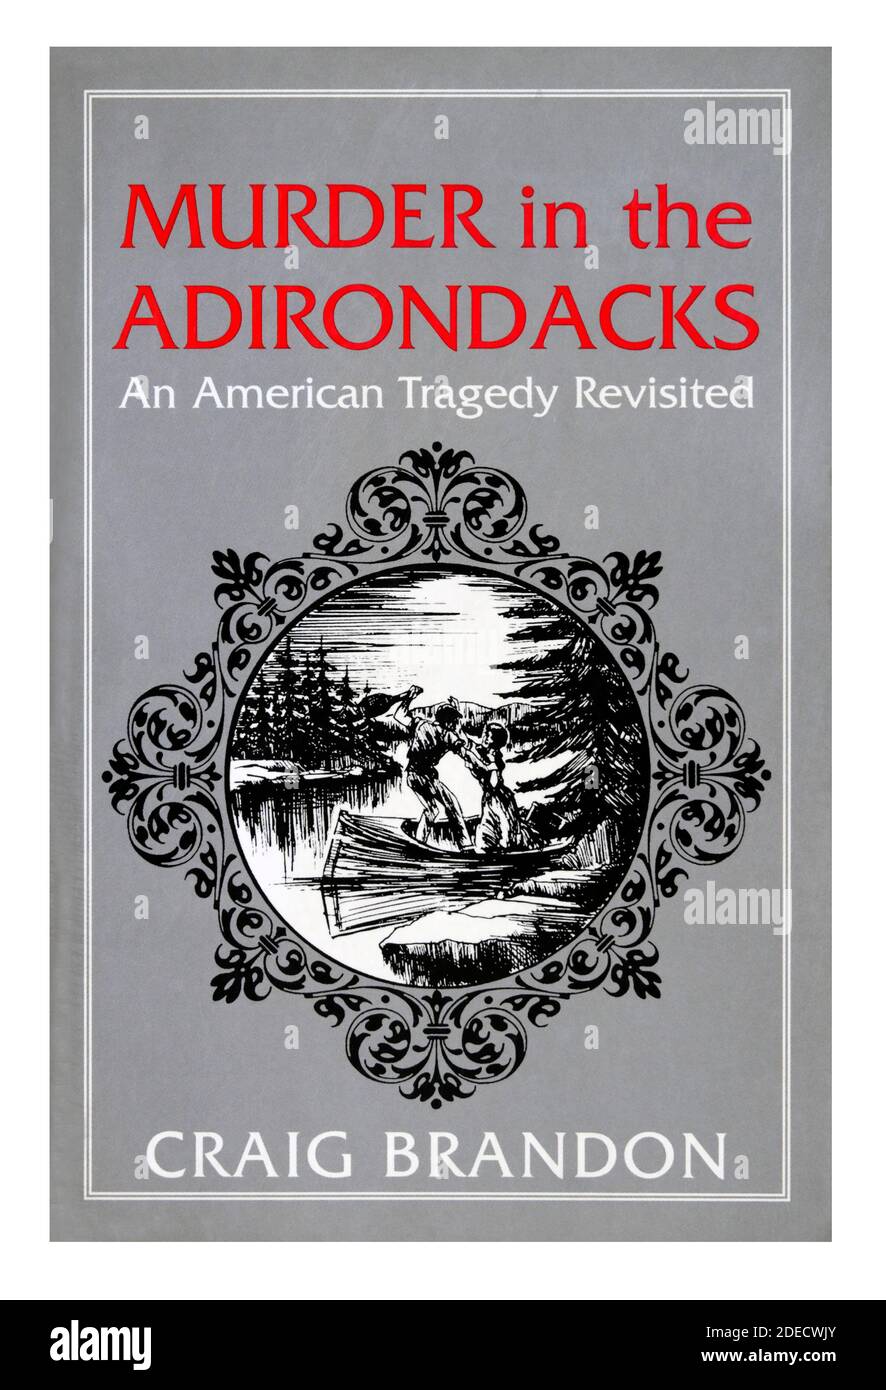 Book cover 'Murder in the Adirondacks An American Tragedy Revisited' by Craig Brandon. Stock Photo